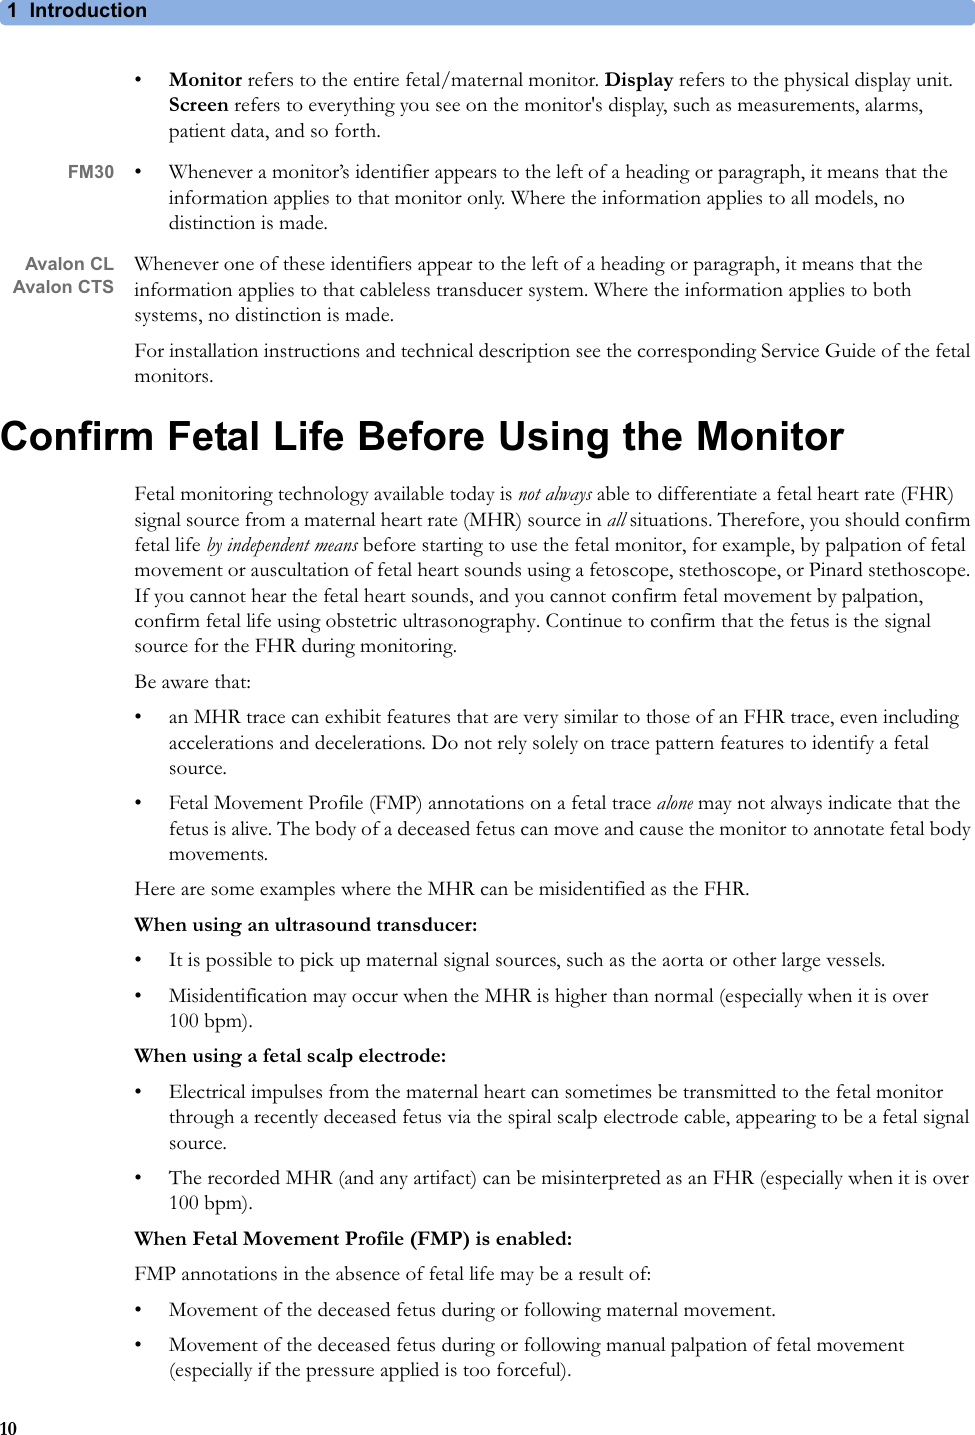 1  Introduction10•Monitor refers to the entire fetal/maternal monitor. Display refers to the physical display unit. Screen refers to everything you see on the monitor&apos;s display, such as measurements, alarms, patient data, and so forth.FM30 • Whenever a monitor’s identifier appears to the left of a heading or paragraph, it means that the information applies to that monitor only. Where the information applies to all models, no distinction is made.Avalon CLAvalon CTSWhenever one of these identifiers appear to the left of a heading or paragraph, it means that the information applies to that cableless transducer system. Where the information applies to both systems, no distinction is made.For installation instructions and technical description see the corresponding Service Guide of the fetal monitors.Confirm Fetal Life Before Using the MonitorFetal monitoring technology available today is not always able to differentiate a fetal heart rate (FHR) signal source from a maternal heart rate (MHR) source in all situations. Therefore, you should confirm fetal life by independent means before starting to use the fetal monitor, for example, by palpation of fetal movement or auscultation of fetal heart sounds using a fetoscope, stethoscope, or Pinard stethoscope. If you cannot hear the fetal heart sounds, and you cannot confirm fetal movement by palpation, confirm fetal life using obstetric ultrasonography. Continue to confirm that the fetus is the signal source for the FHR during monitoring.Be aware that:• an MHR trace can exhibit features that are very similar to those of an FHR trace, even including accelerations and decelerations. Do not rely solely on trace pattern features to identify a fetal source.• Fetal Movement Profile (FMP) annotations on a fetal trace alone may not always indicate that the fetus is alive. The body of a deceased fetus can move and cause the monitor to annotate fetal body movements.Here are some examples where the MHR can be misidentified as the FHR.When using an ultrasound transducer:• It is possible to pick up maternal signal sources, such as the aorta or other large vessels.• Misidentification may occur when the MHR is higher than normal (especially when it is over 100 bpm).When using a fetal scalp electrode:• Electrical impulses from the maternal heart can sometimes be transmitted to the fetal monitor through a recently deceased fetus via the spiral scalp electrode cable, appearing to be a fetal signal source.• The recorded MHR (and any artifact) can be misinterpreted as an FHR (especially when it is over 100 bpm).When Fetal Movement Profile (FMP) is enabled:FMP annotations in the absence of fetal life may be a result of:• Movement of the deceased fetus during or following maternal movement.• Movement of the deceased fetus during or following manual palpation of fetal movement (especially if the pressure applied is too forceful).